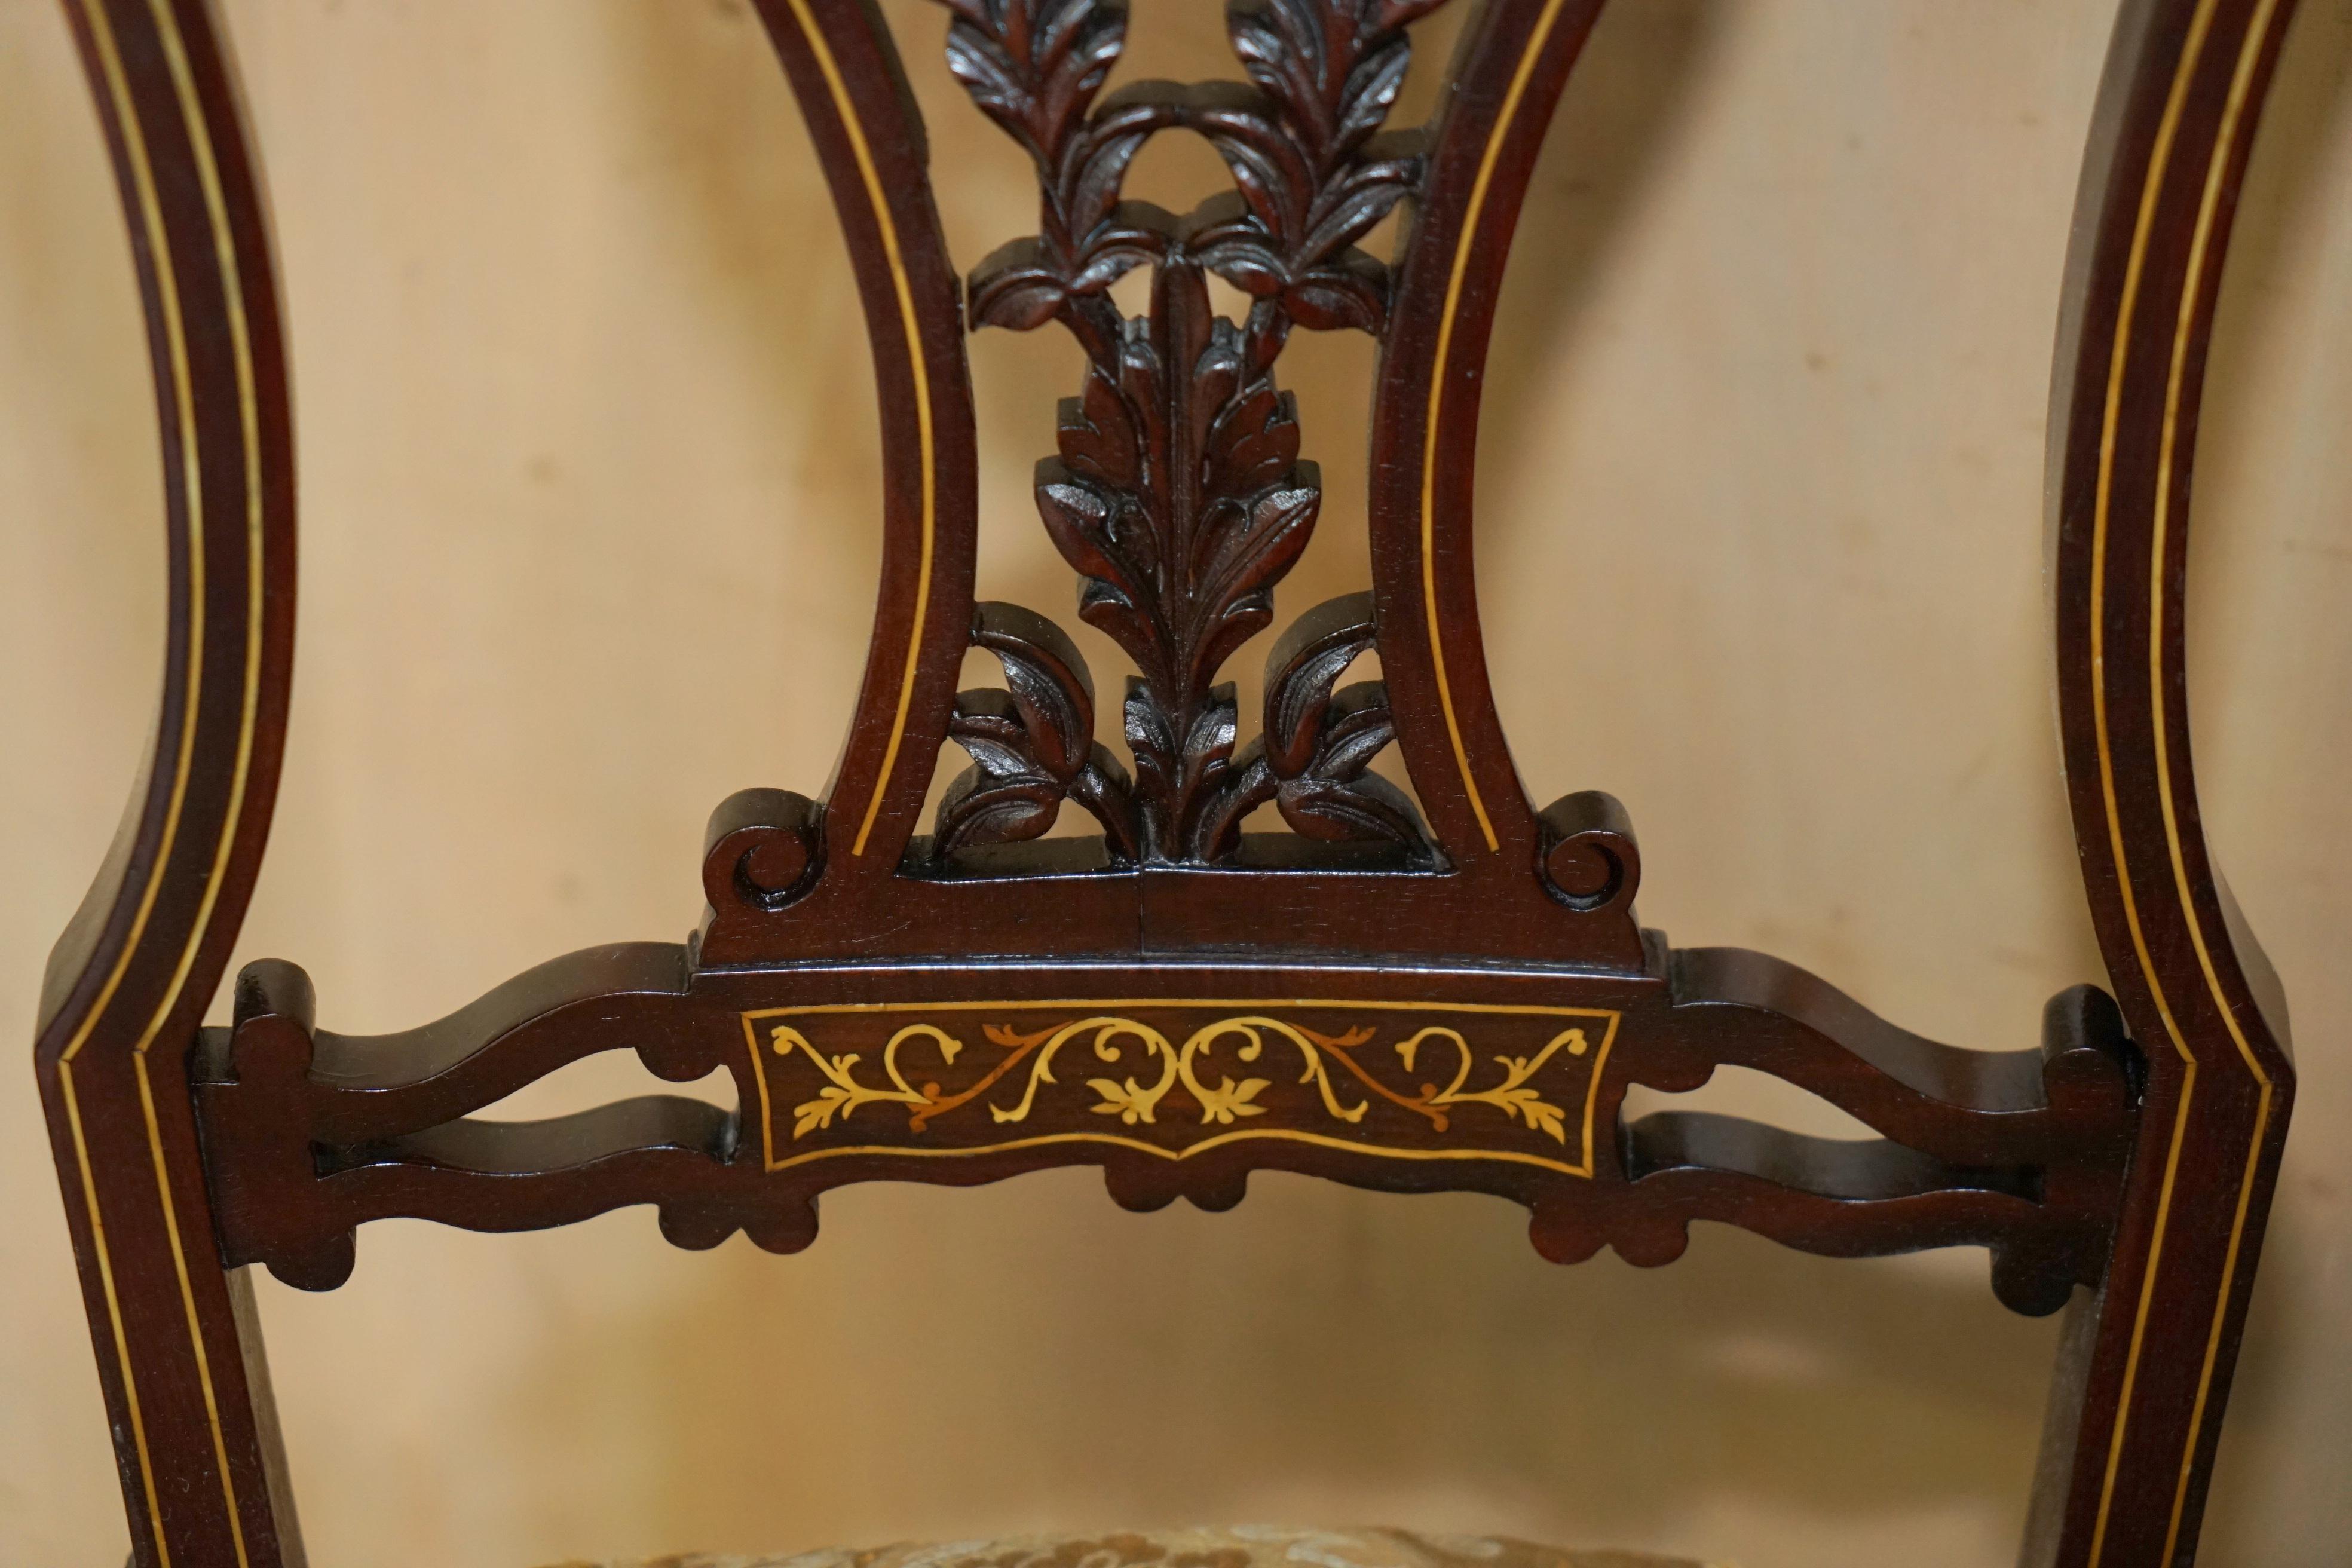 PAiR OF ANTIQUE VICTORIAN HARDWOOD SALON CHAIRS WITH STUNNING INLAID BACK PANELS For Sale 13